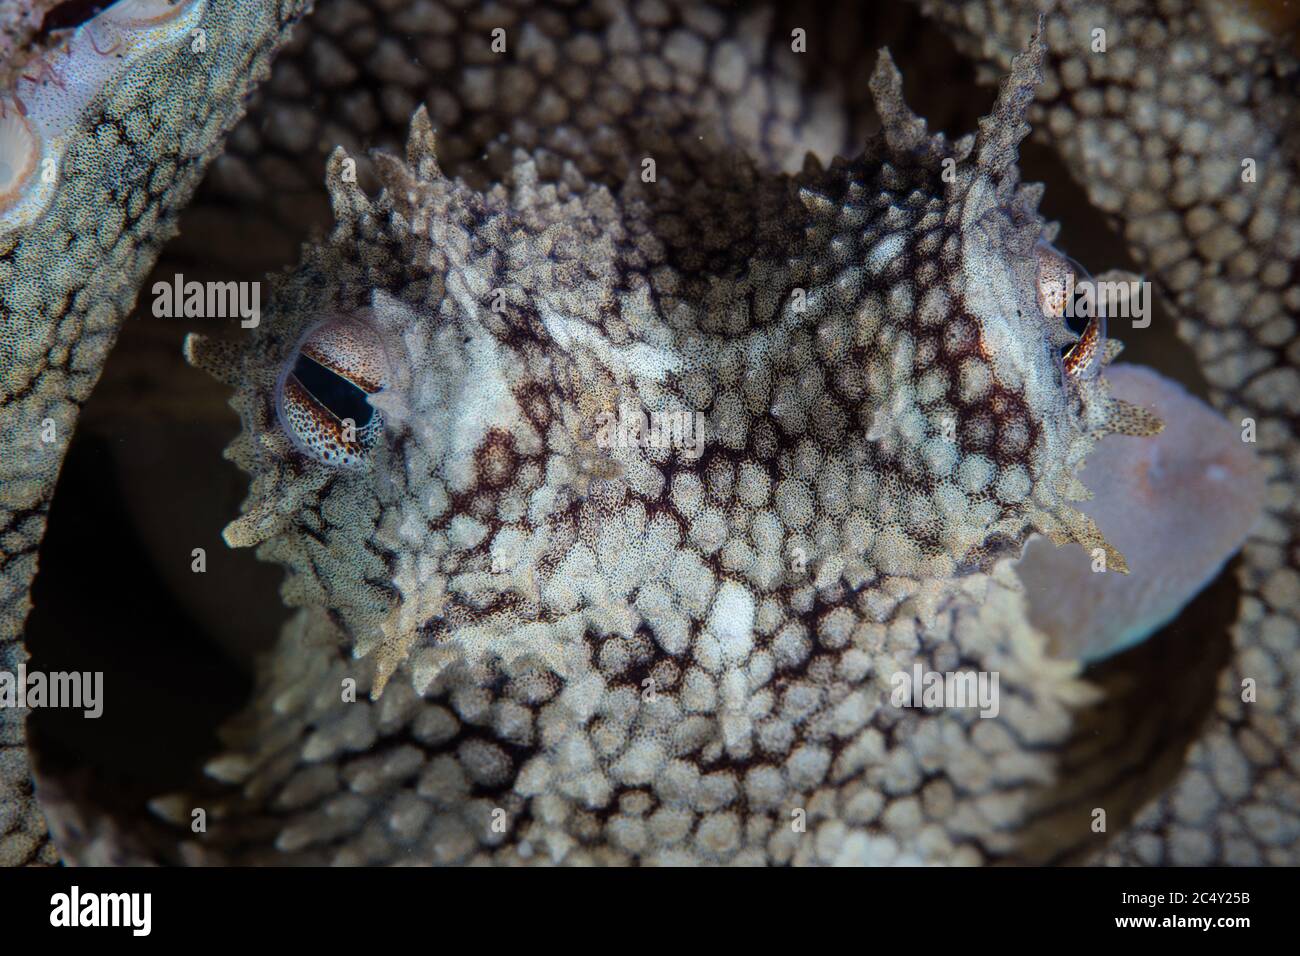 Detail of the eyes and siphon of a Coconut octopus, Amphioctopus marginatus, in Indonesia. This animal often uses empty coconut shells for dens. Stock Photo